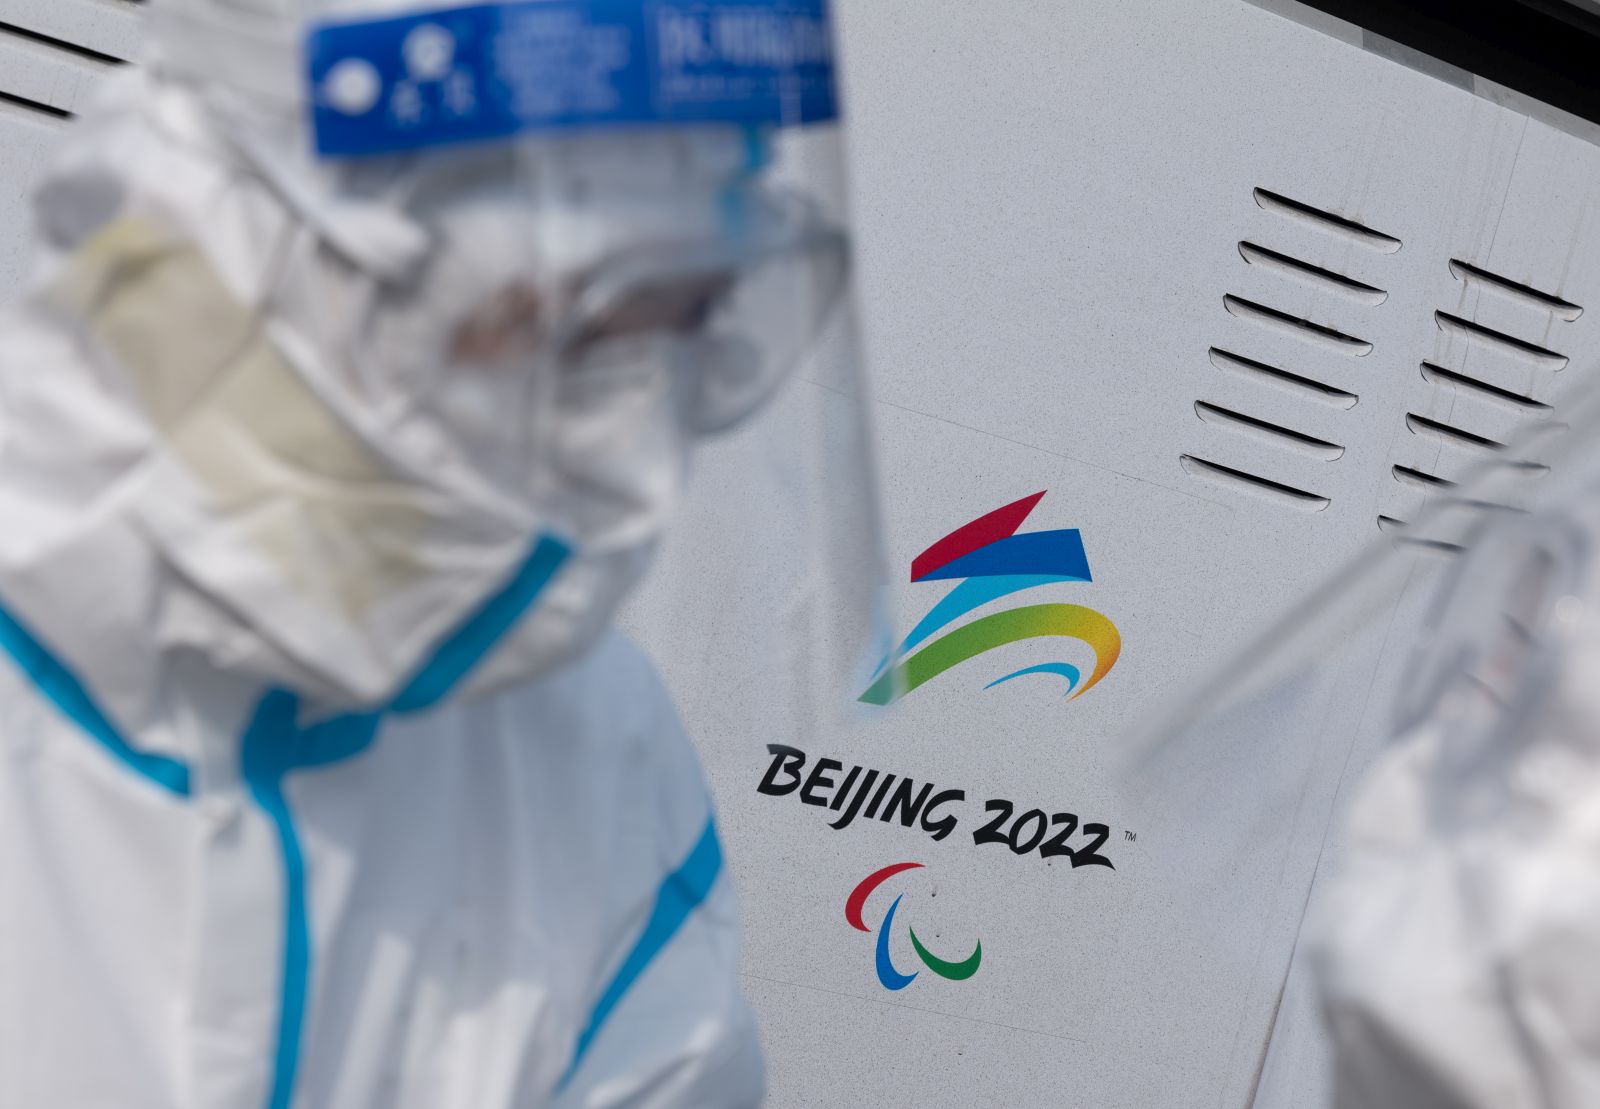 epa09719672 Staffs wearing protective gear talk next an Olympics sign at the Beijing International Airport in China, 31 January 2022. The Beijing 2022 Winter Olympics is scheduled to start on 04 February 2022.  EPA/JEON HEON-KYUN